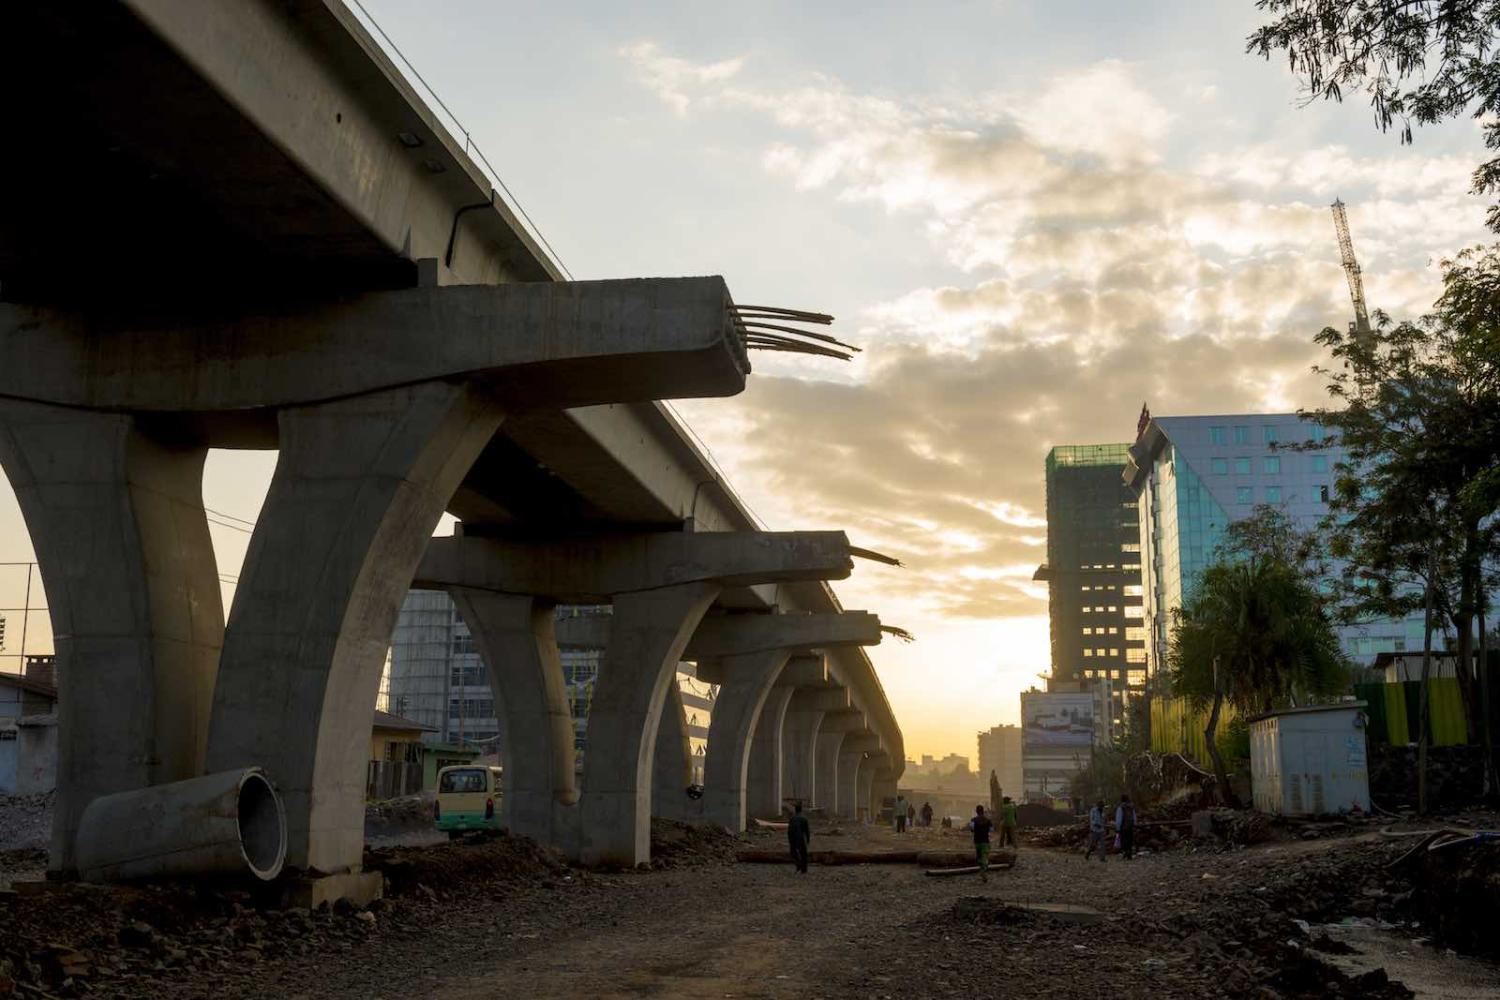 Light rail system under construction in Addis Ababa, Ethiopia, contracted by the China Railway Group Ltd (Photo: Yannick Tylle/Getty Images)